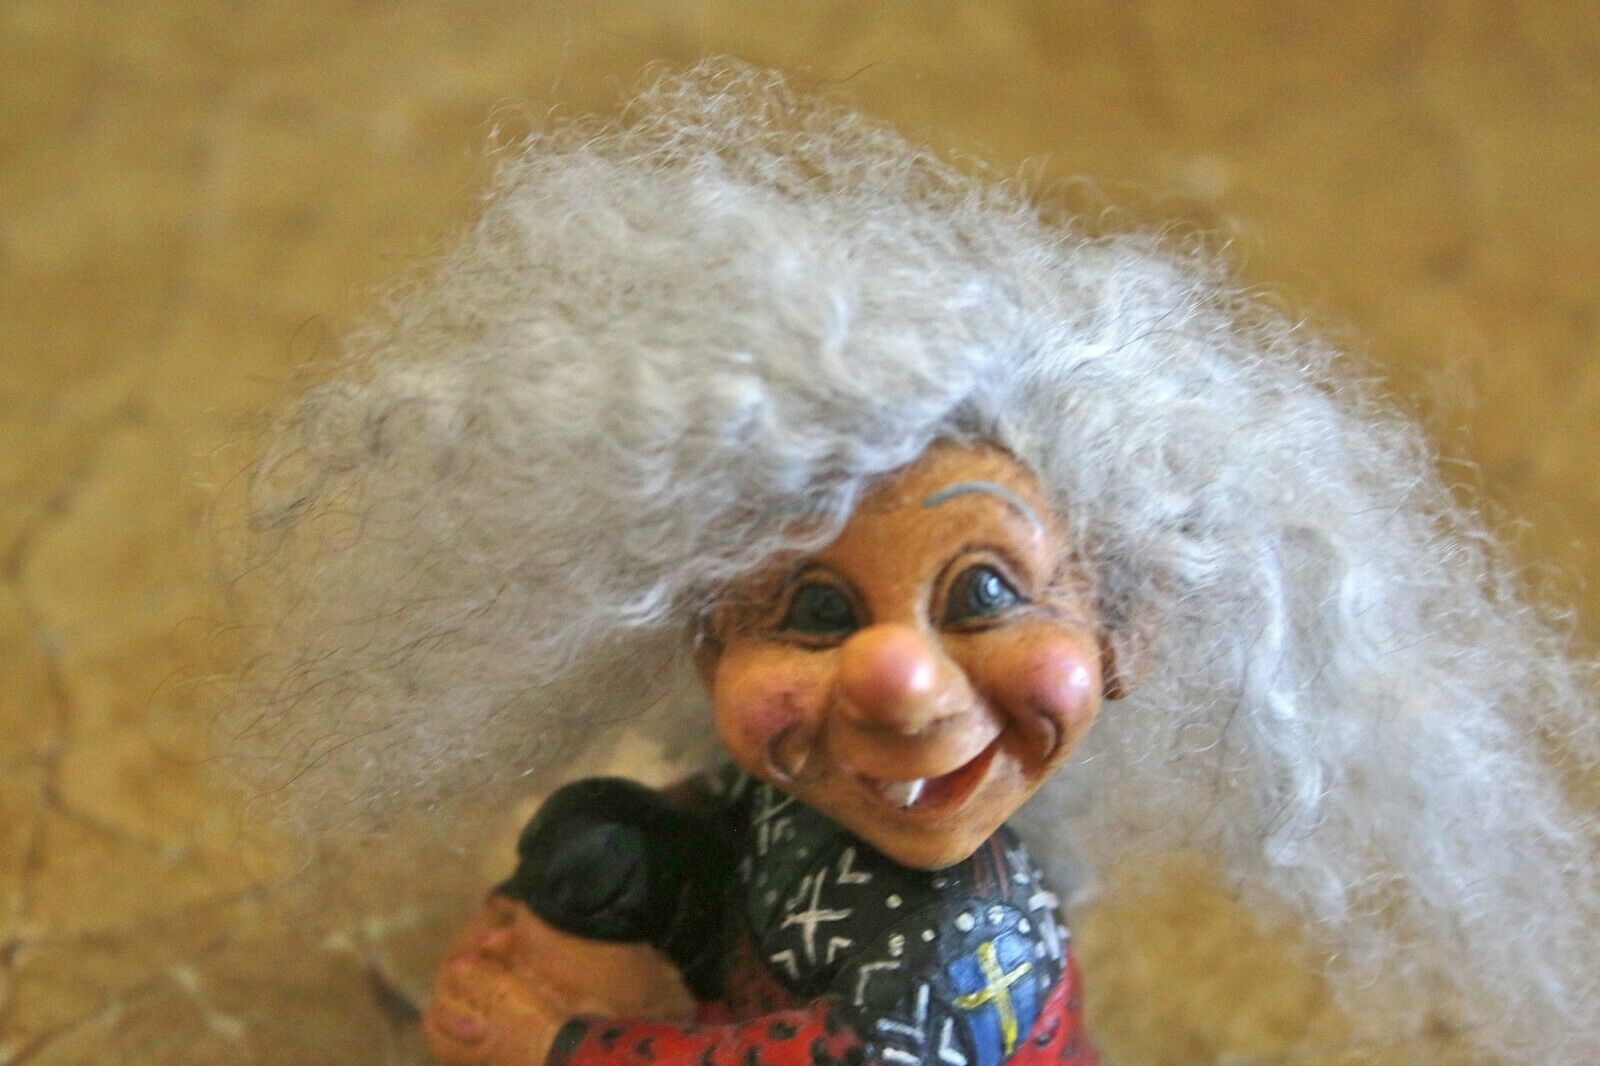 Allan Flink Sweden Souvenir Troll/gnome Seated With Long Wooly Hair